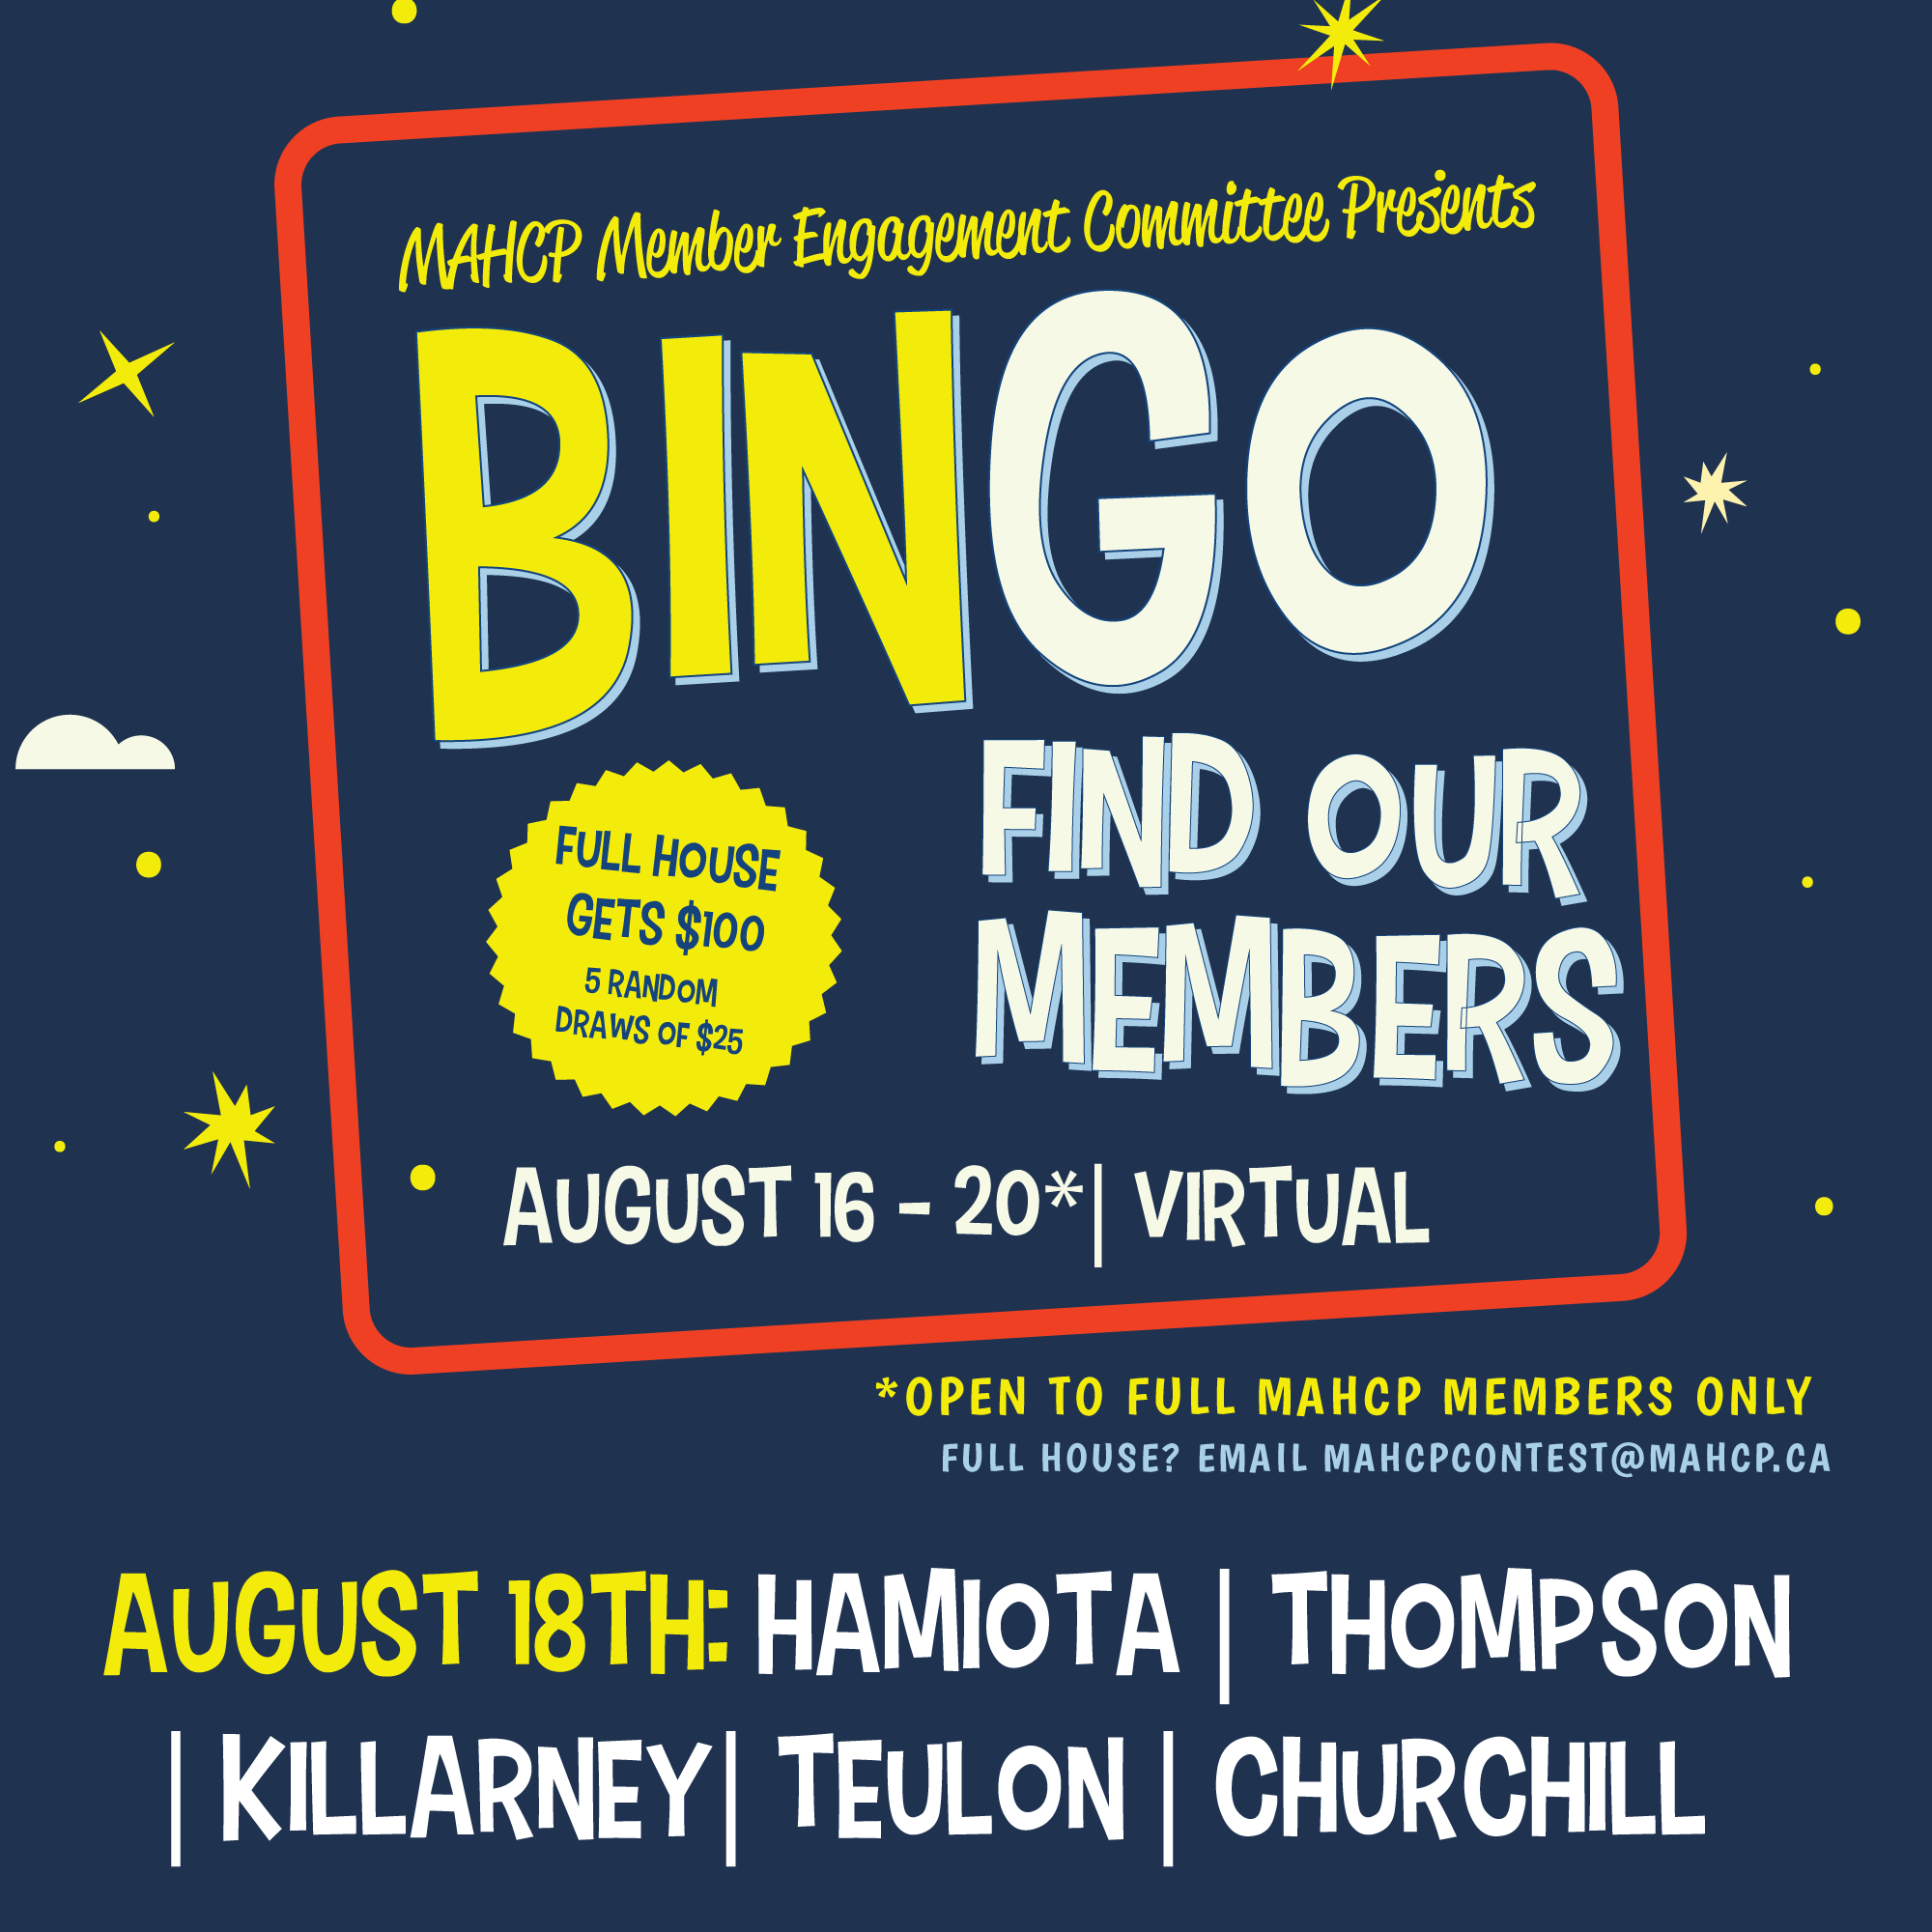 MAHCP Bingo for Wednesday, August 18th